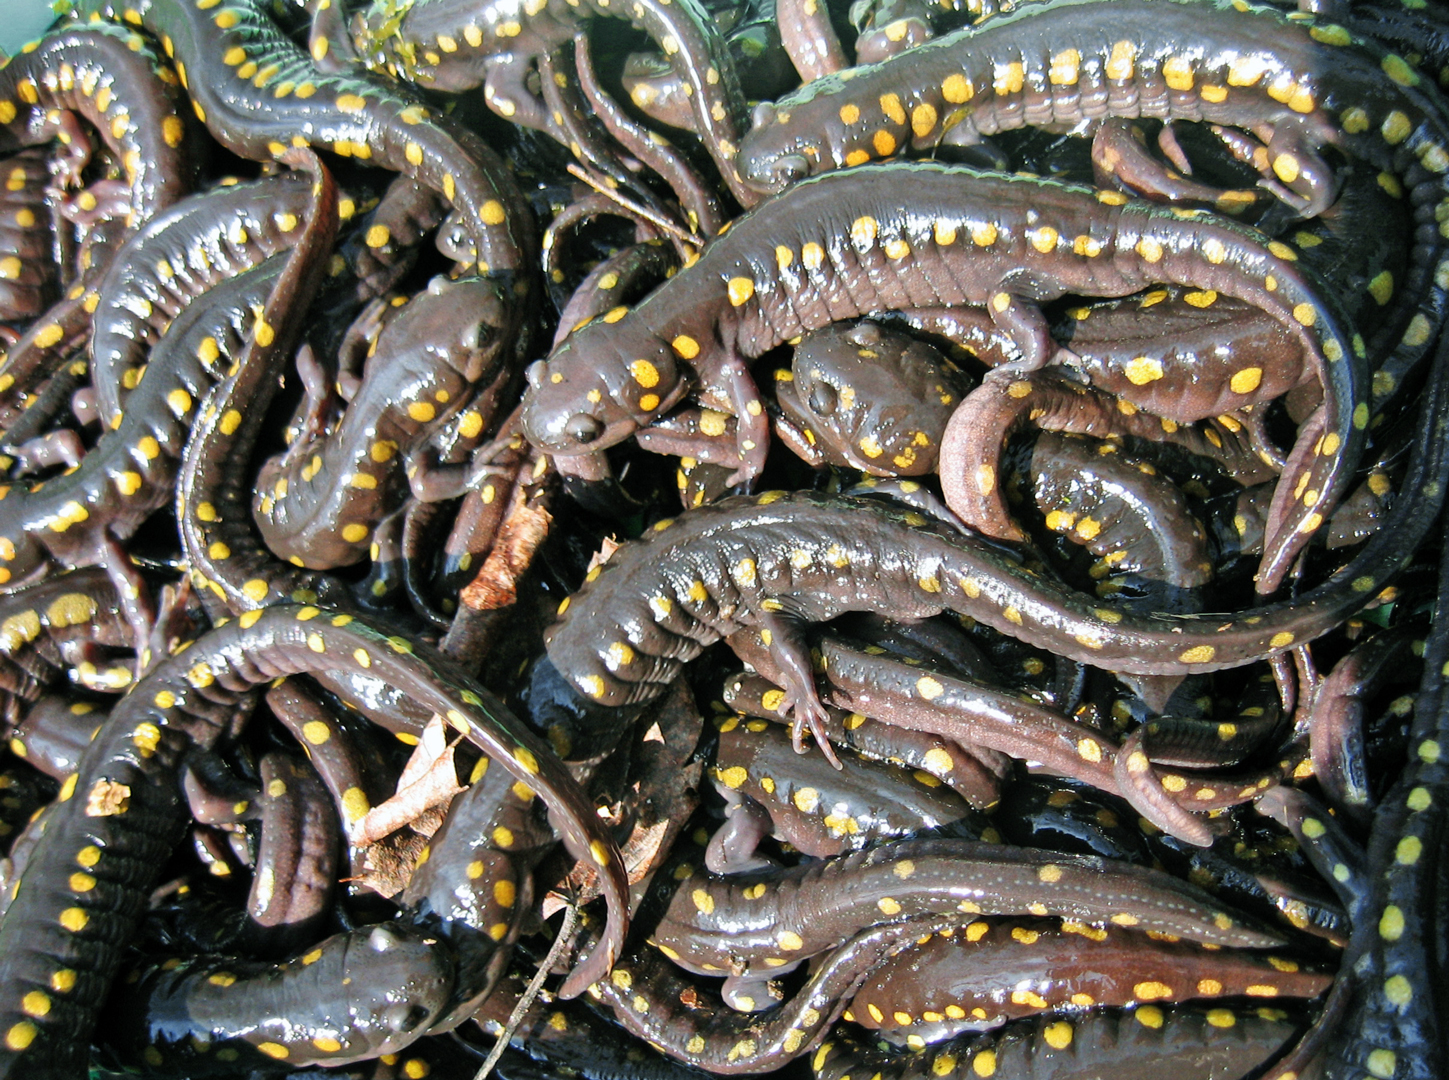 A congress of spotted salamanders, with hundreds of animals writhing together at the beginning of the mating season